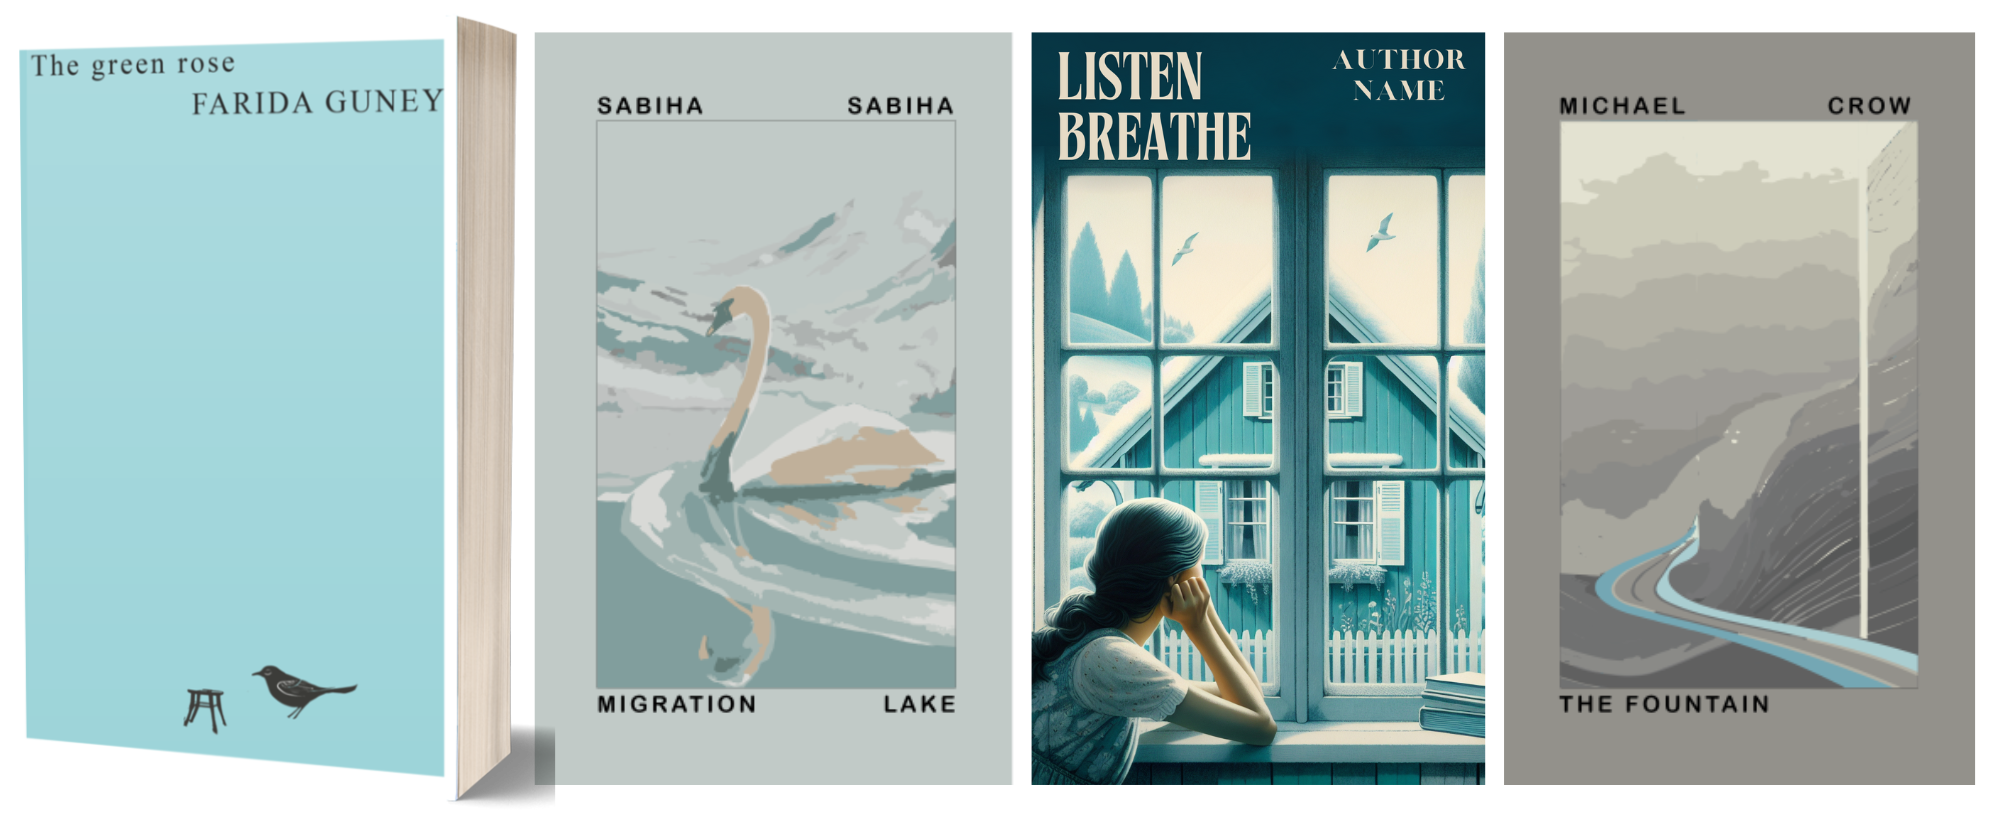 A group of four book covers. The first cover shows a bird and a stool on a light blue background. The second has a swan on a lake. The third depicts a person looking out a window at distant birds. The last features a stylized gray landscape with a winding road leading to a fountain in the distance. BookSelf Book Cover Design & Premade Book Covers